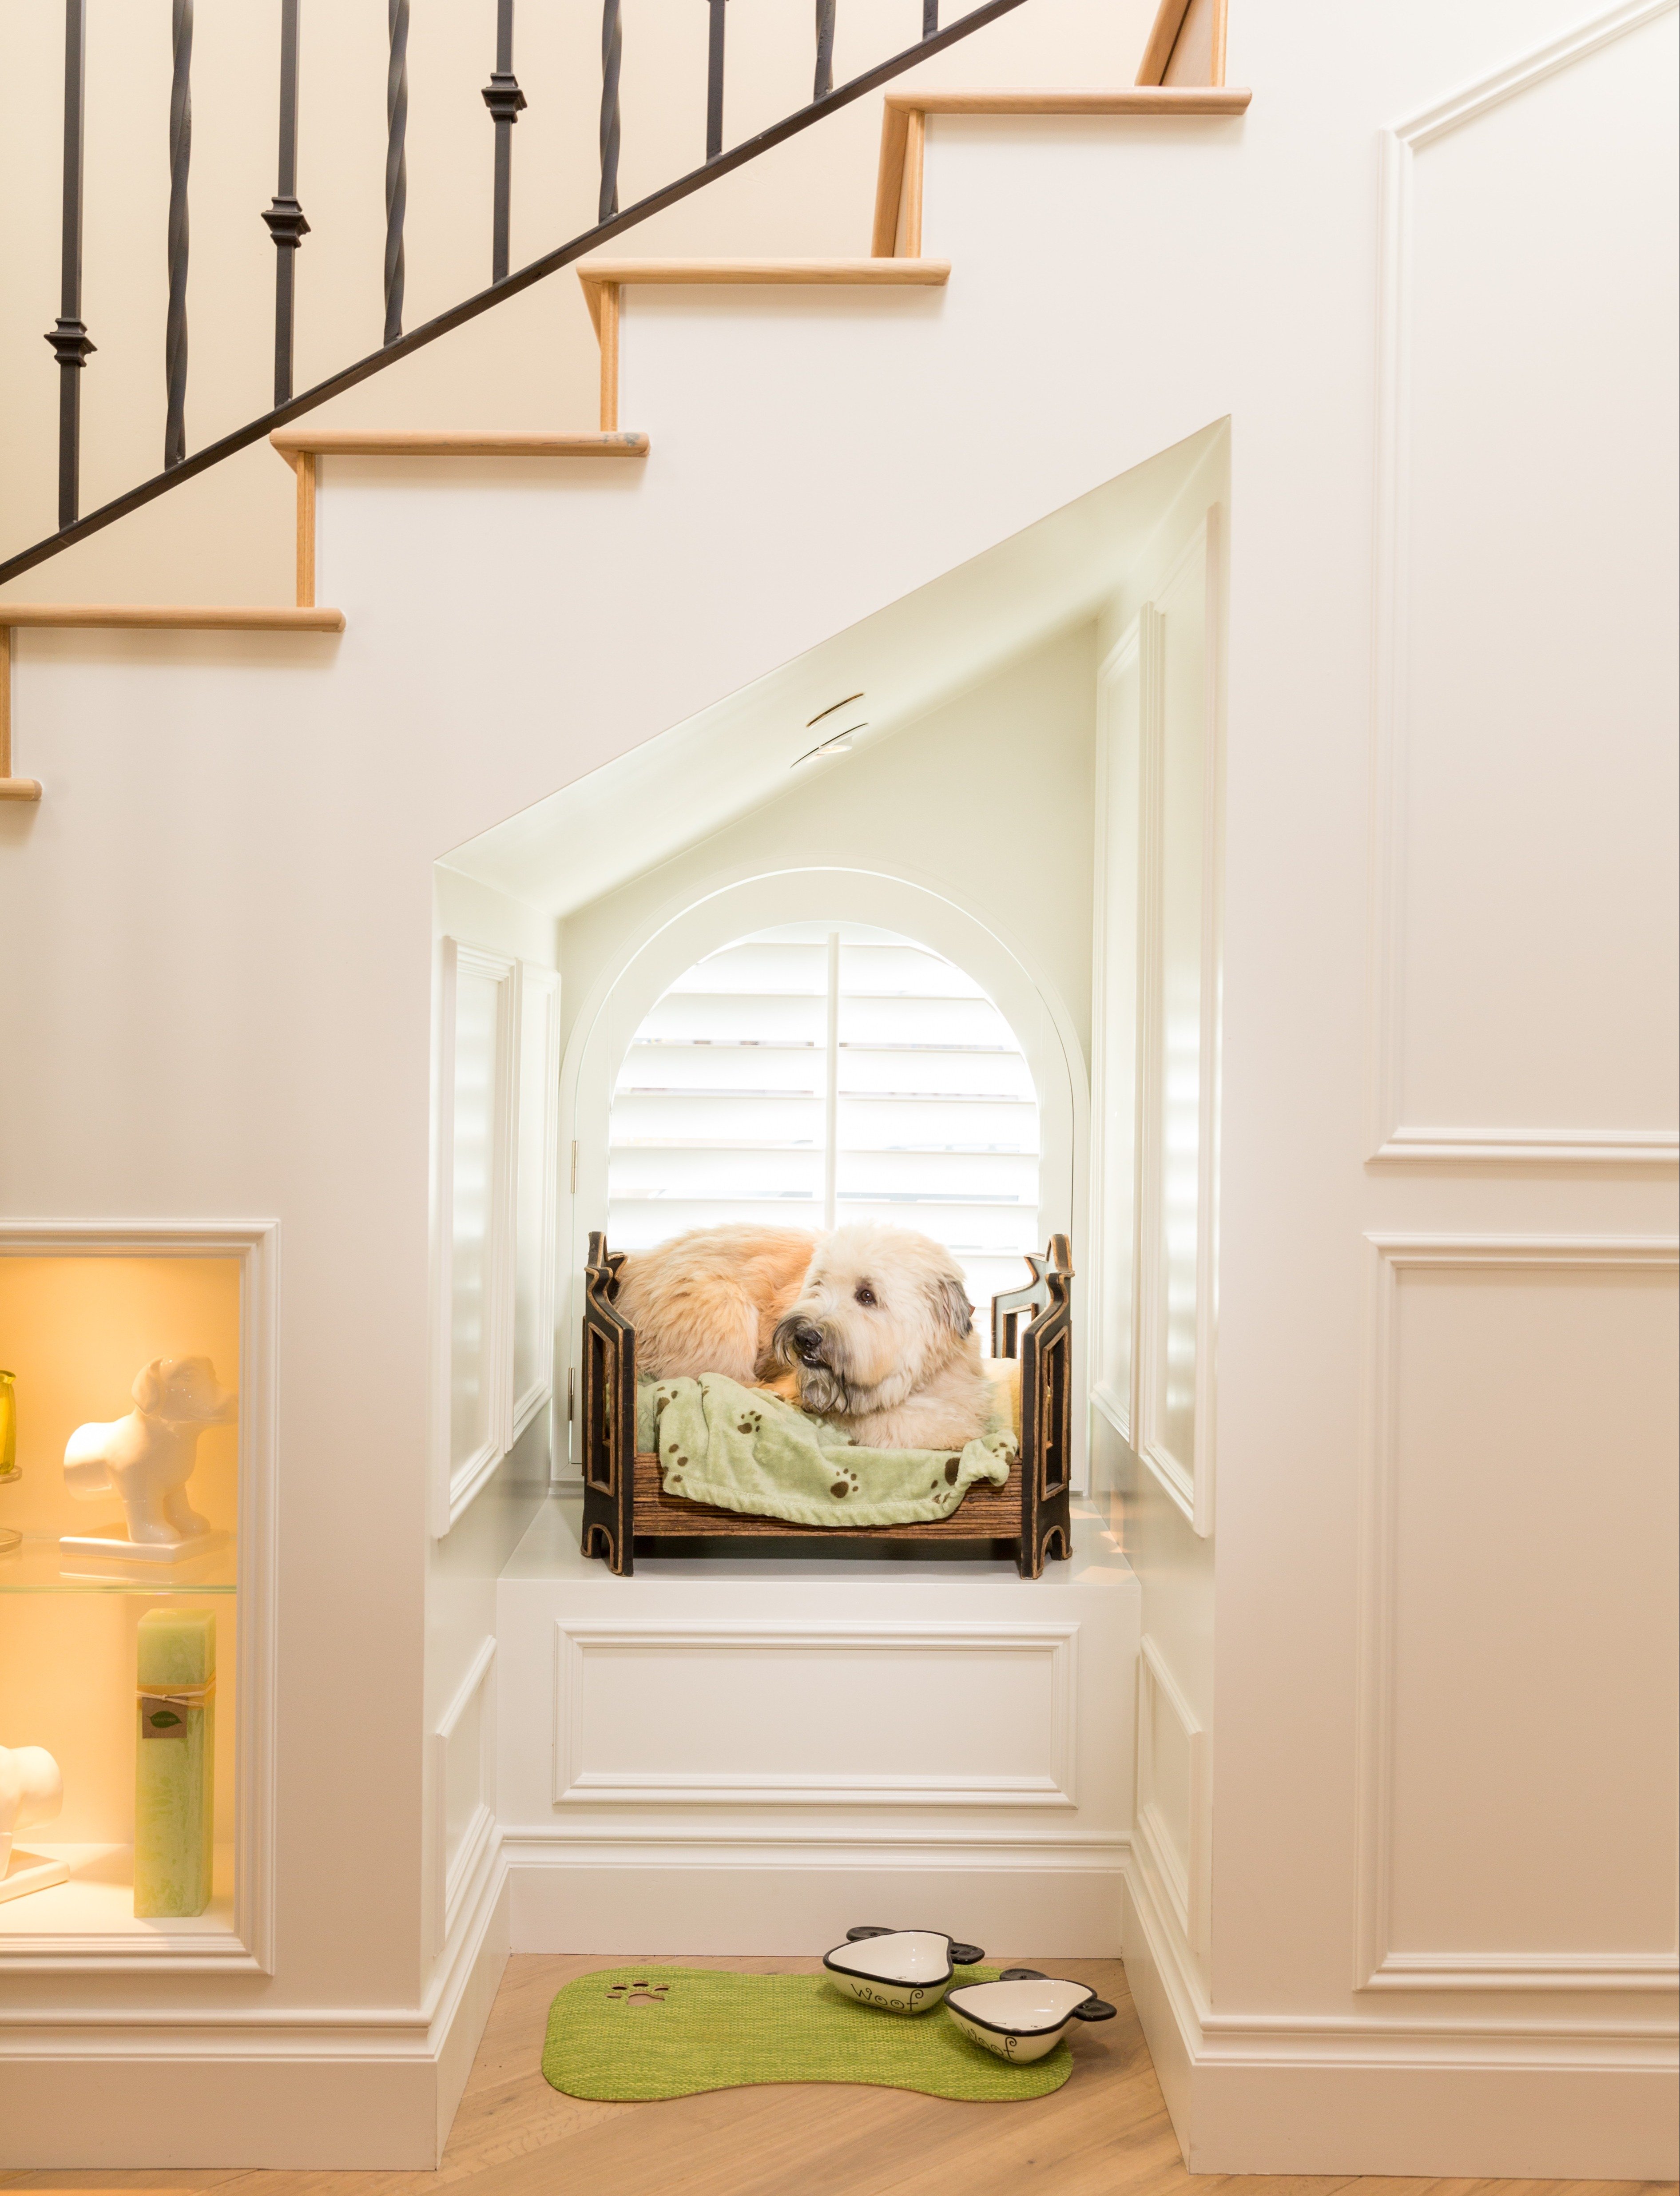 5 Ingenious Ways to Incorporate Your Pets Into Your Remodel